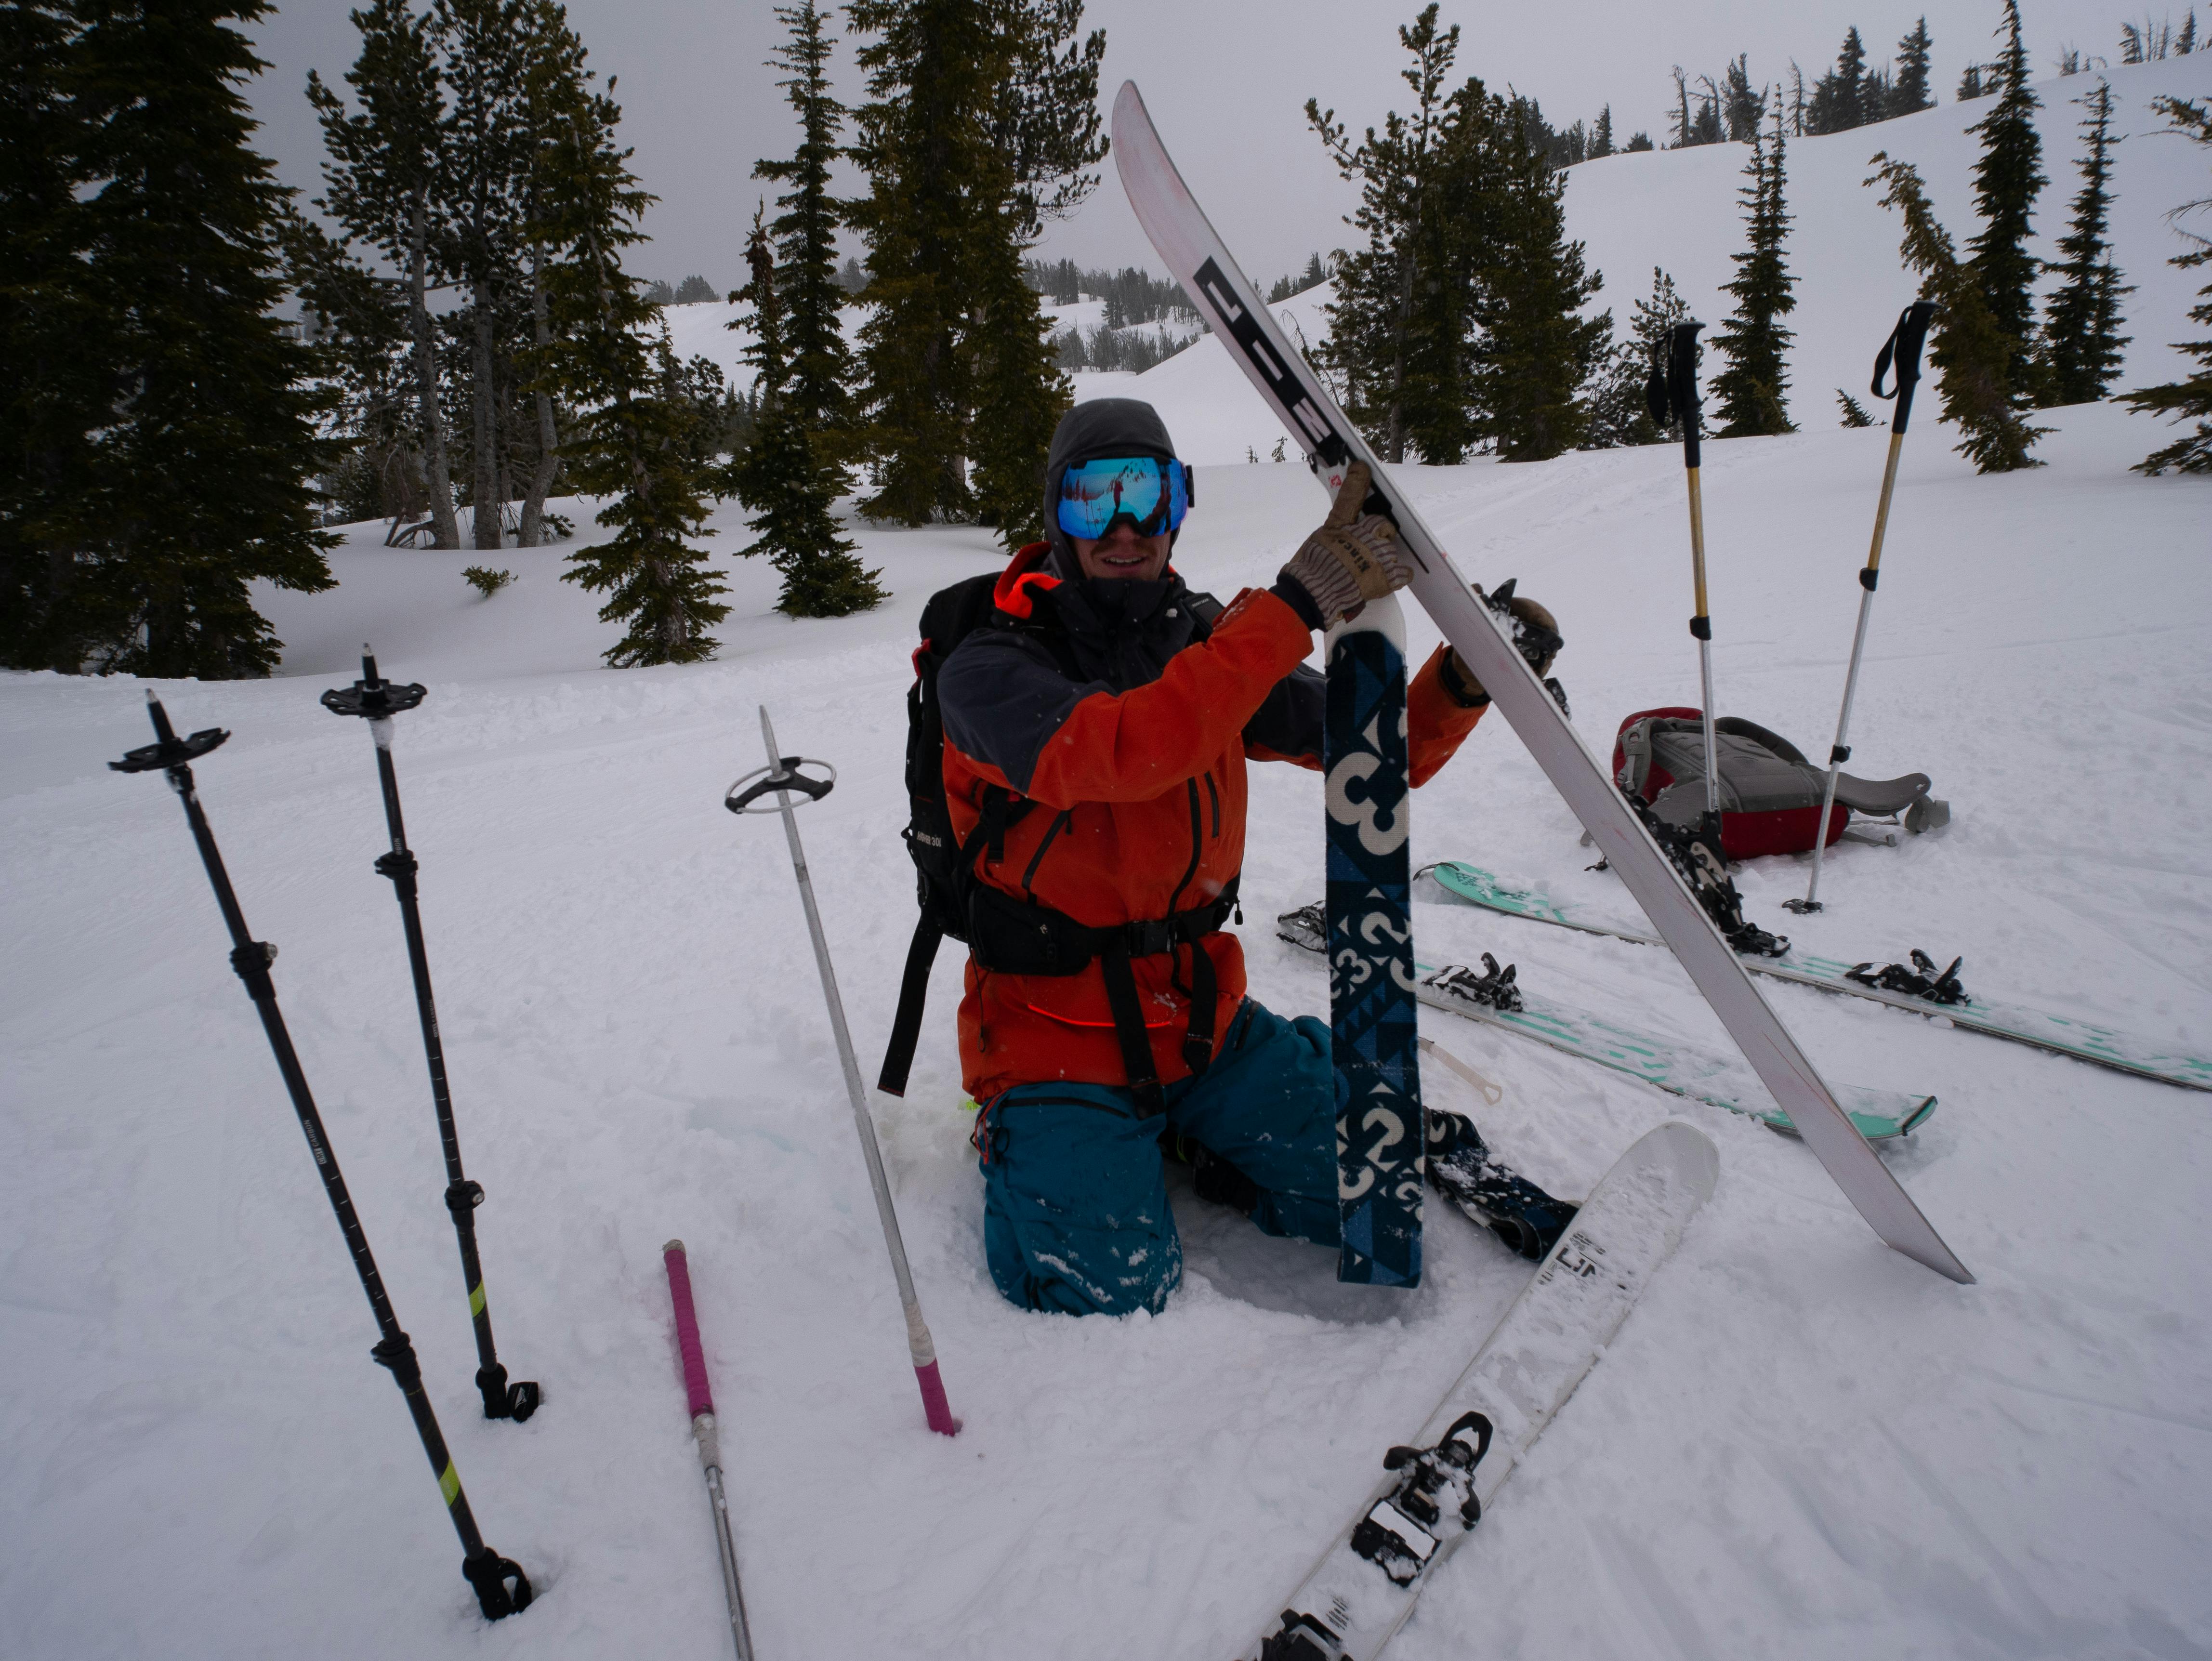 A skier taking the skins off of his backcountry skis.